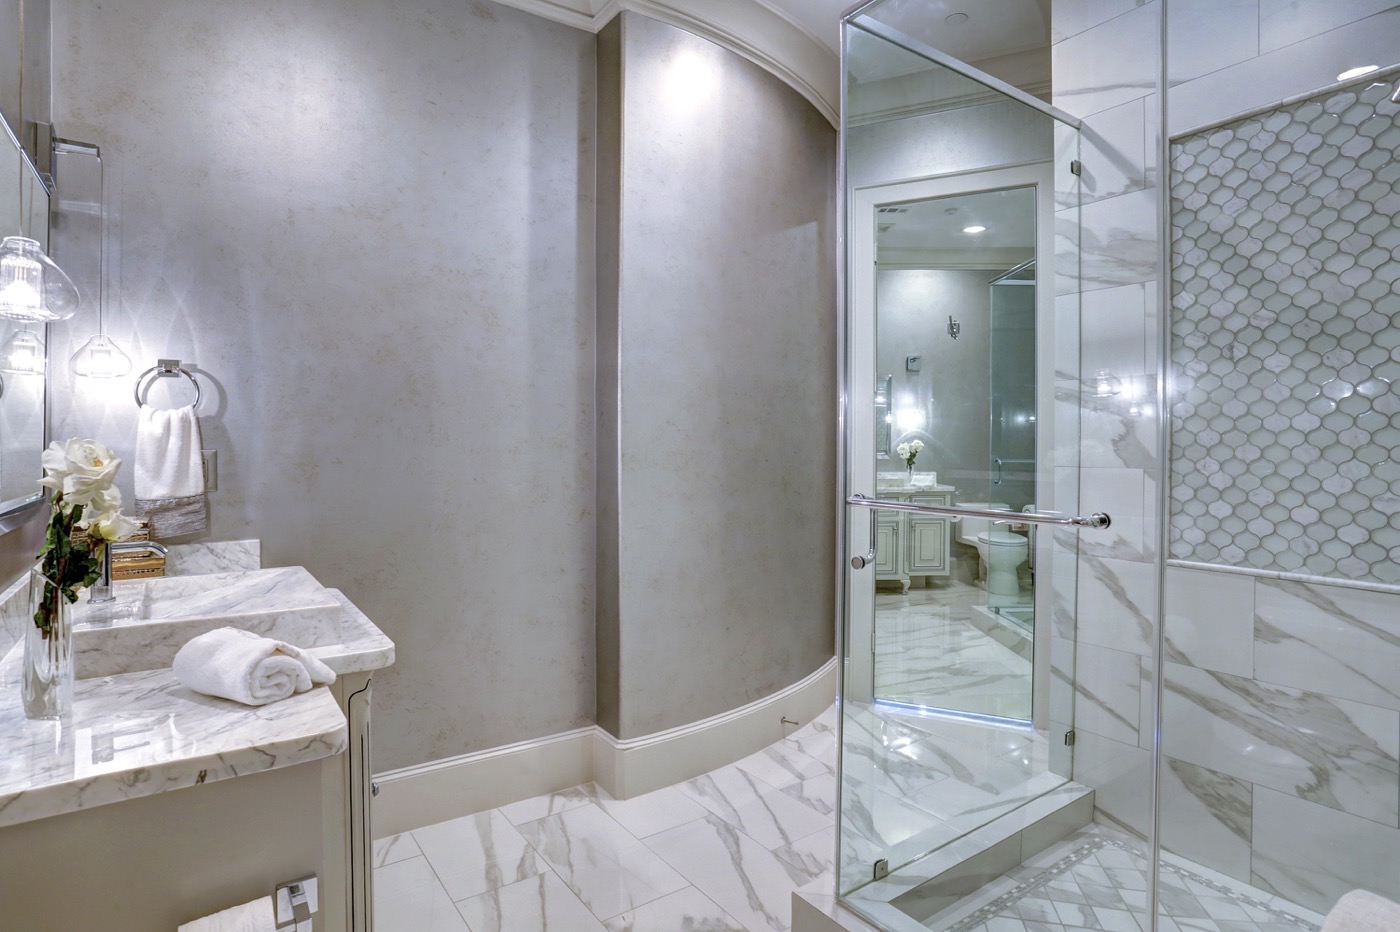 Gently curving wall, white Carrara marble sink and inlaid tile shower